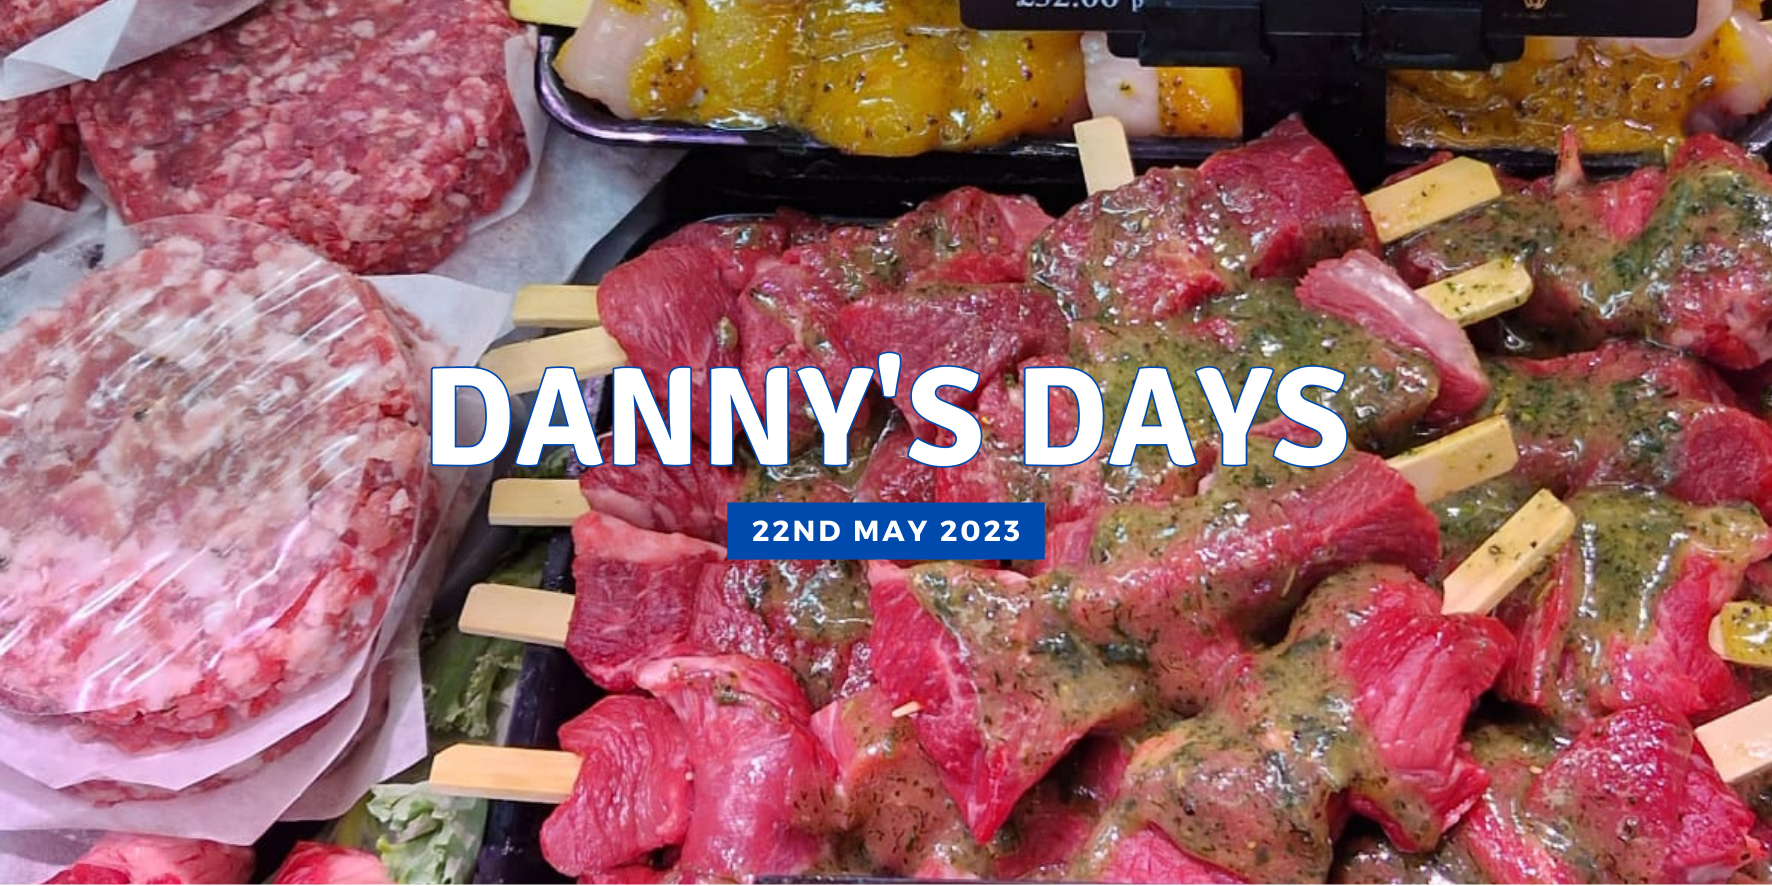 Danny's Days - 22nd May 2023